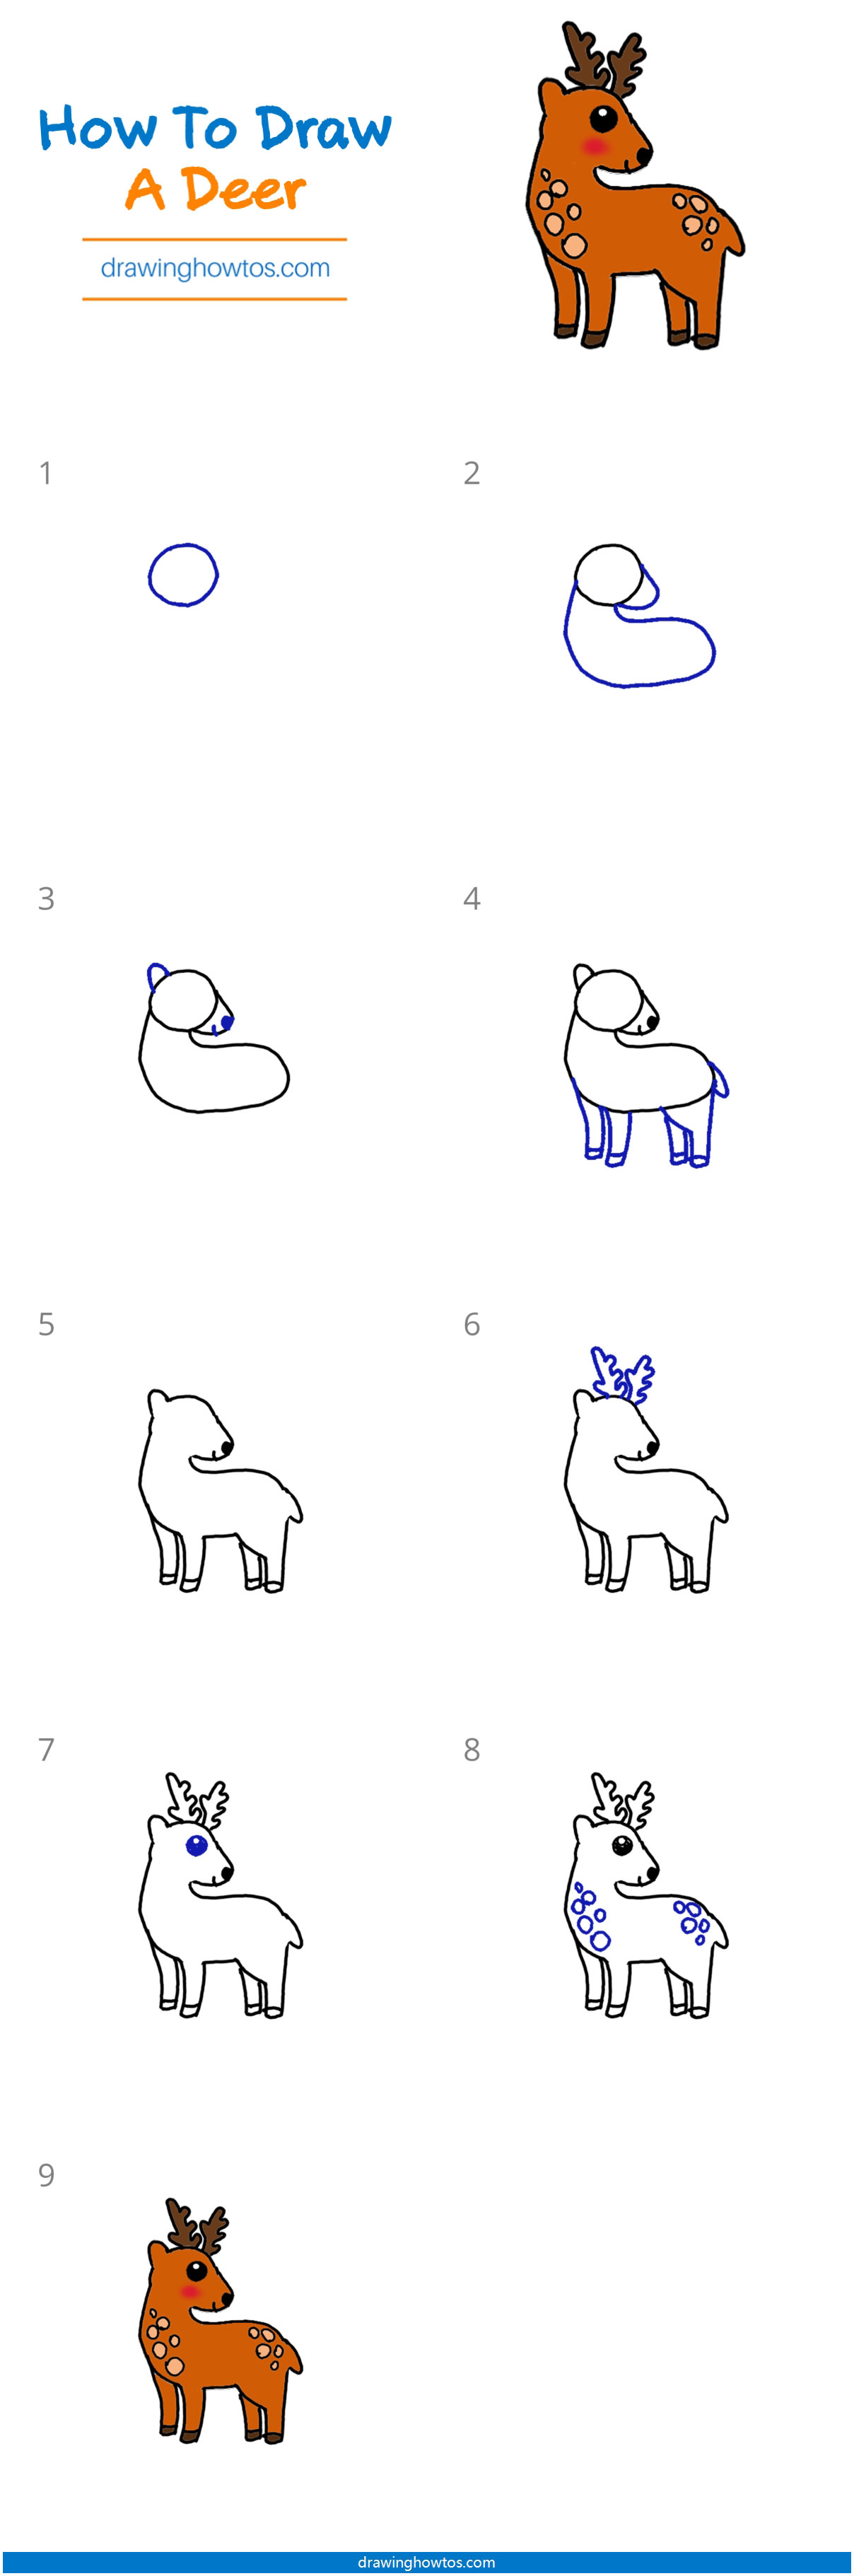 How to Draw a Deer Step by Step